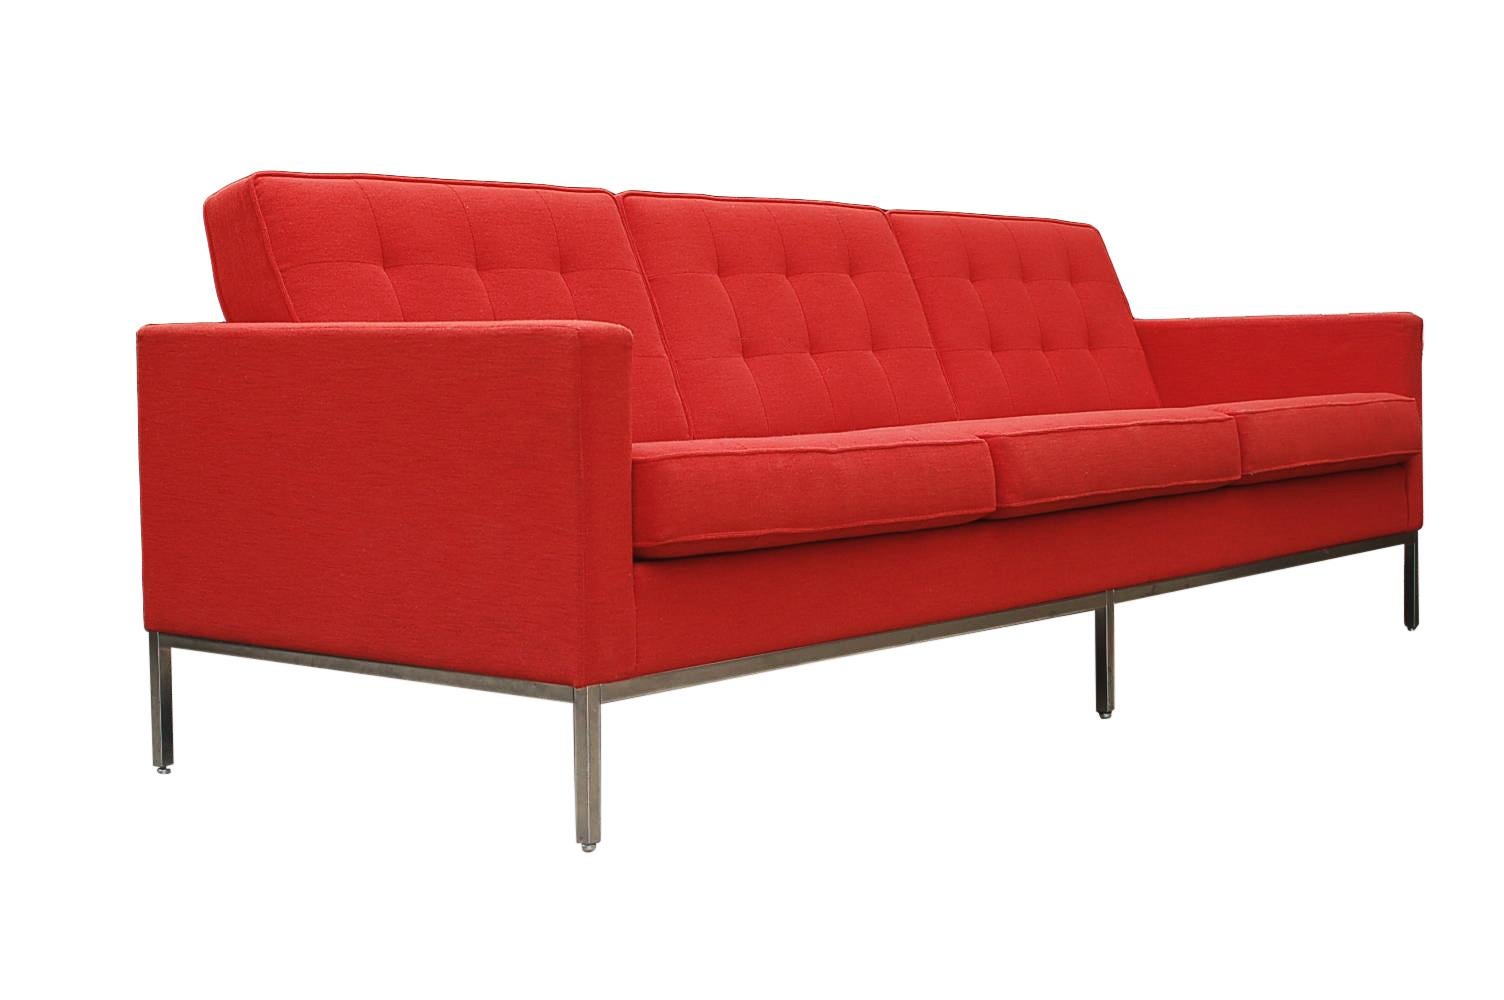 Steel Florence Knoll for Knoll Sofa and Matching Lounge Chairs Living Room Set in Red